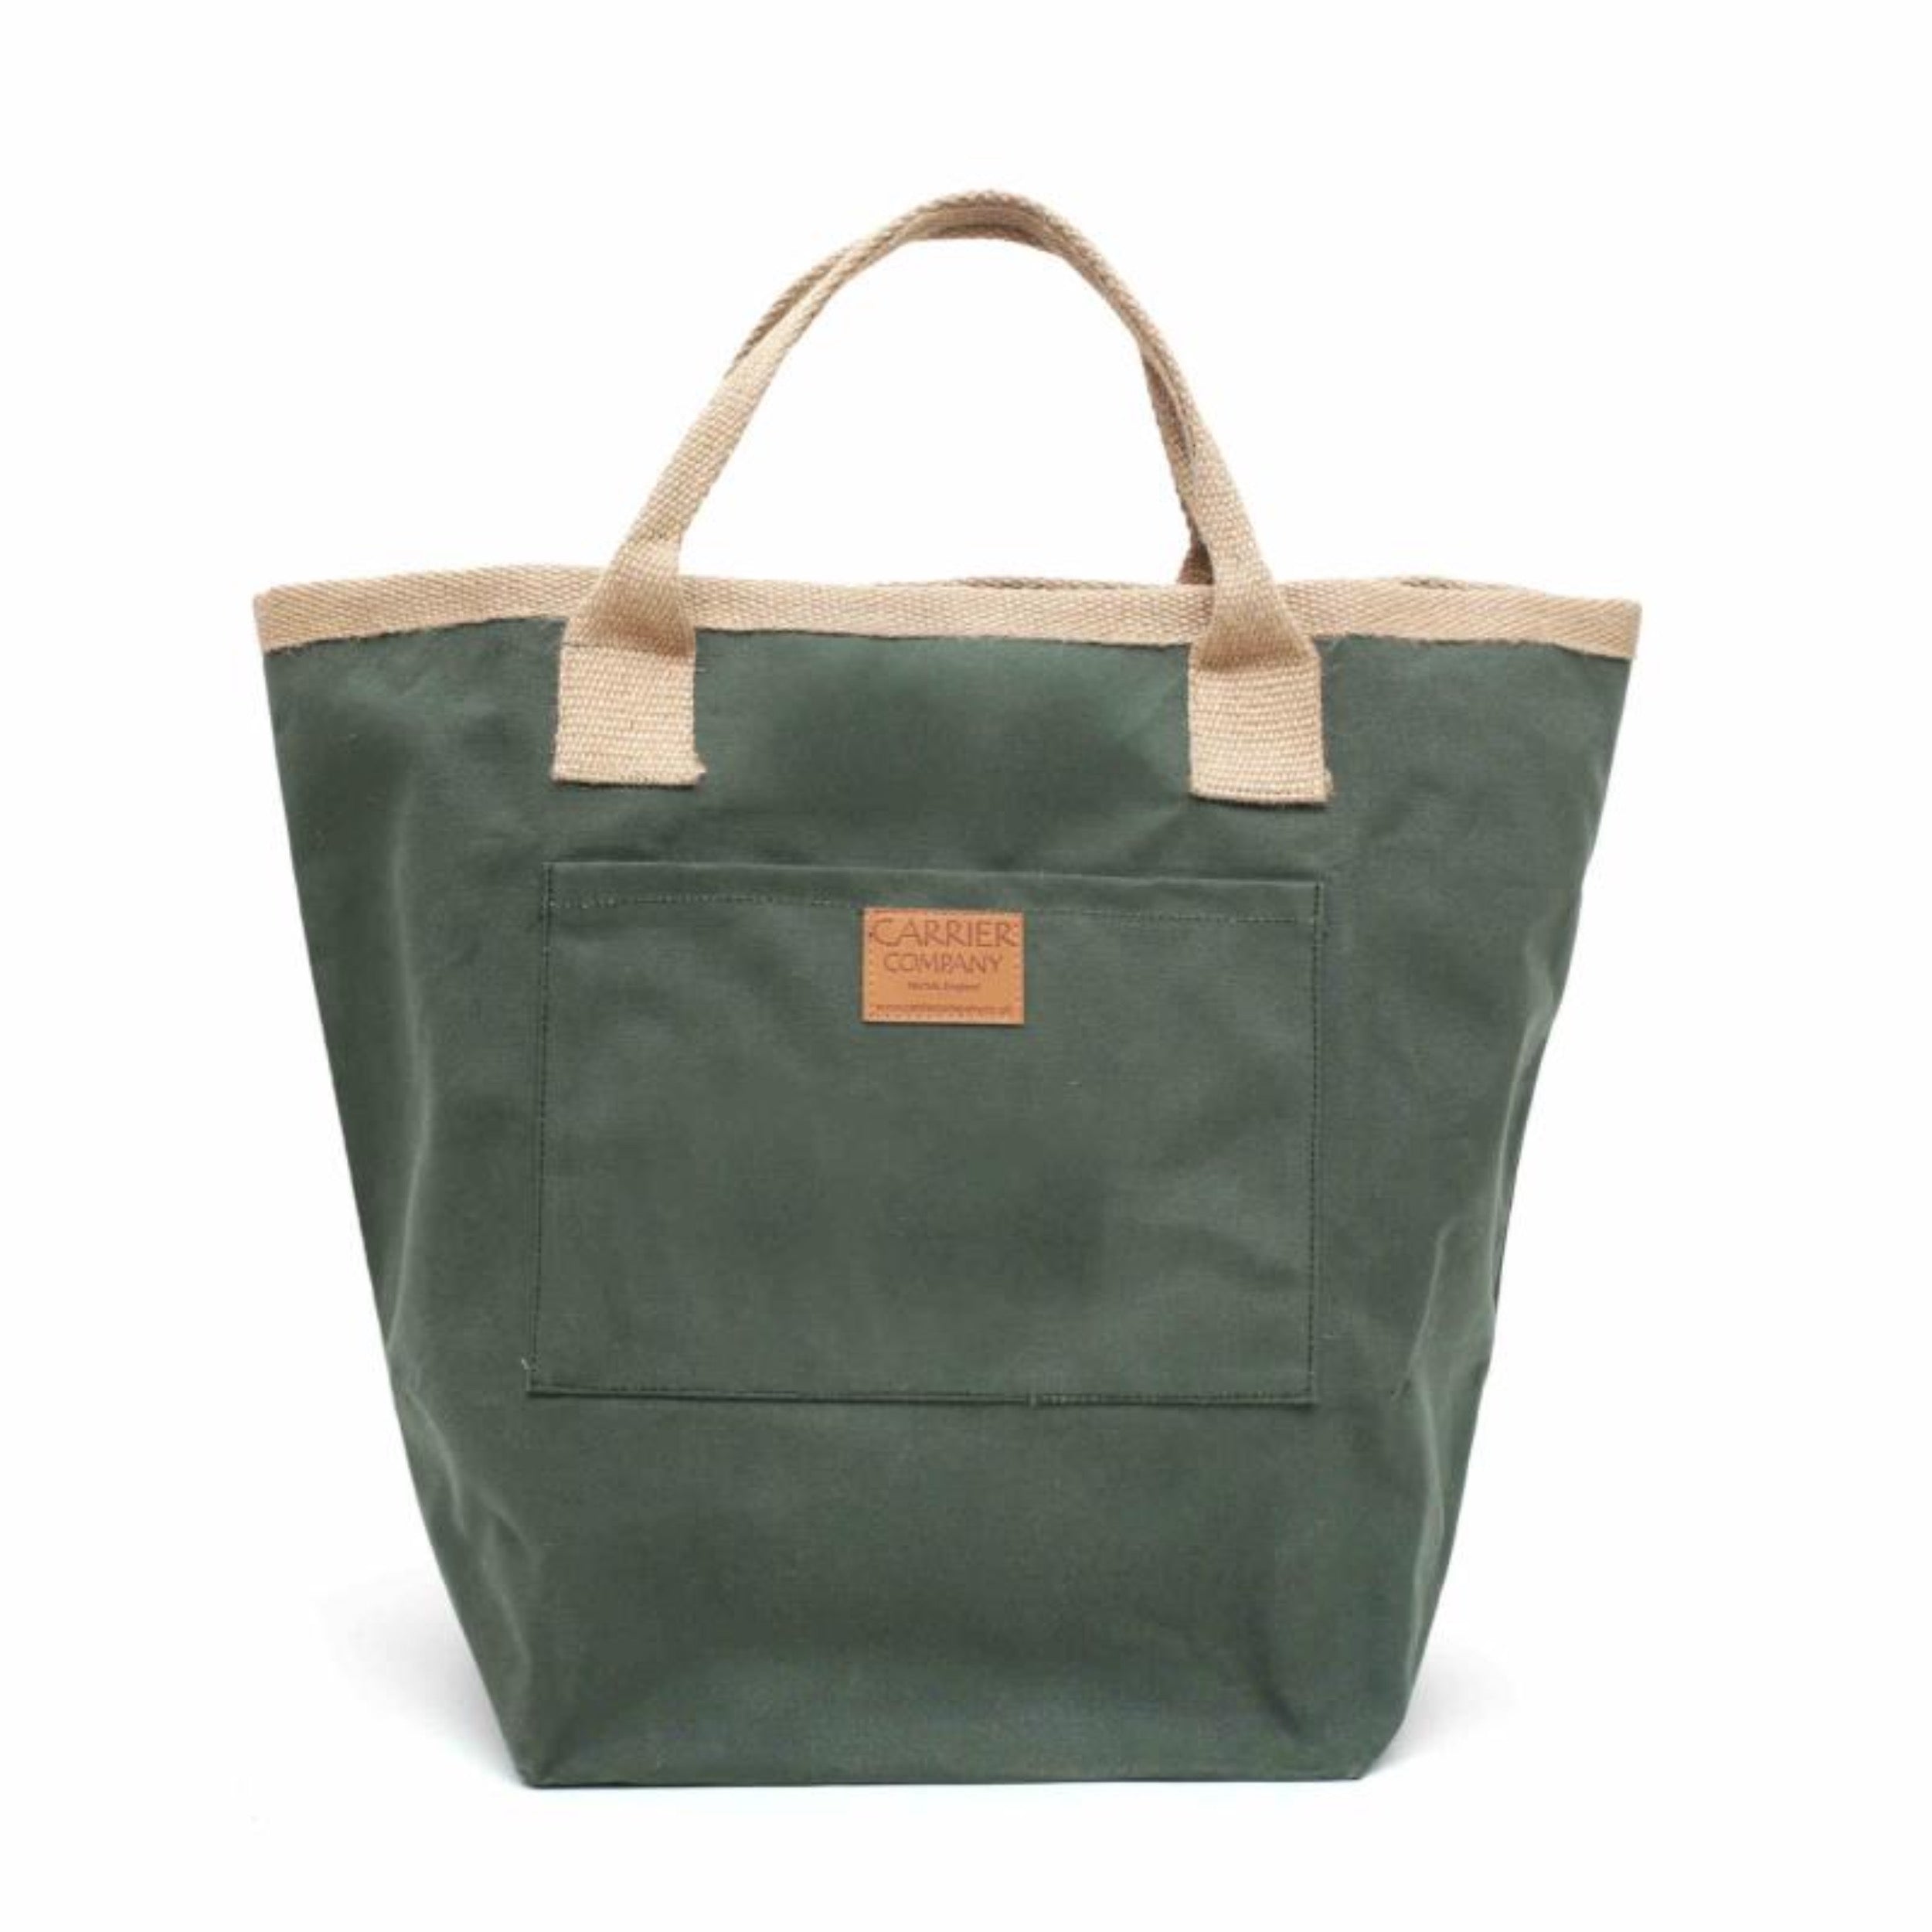 Carrier Company Loot and Boot Bag in Spruce Green